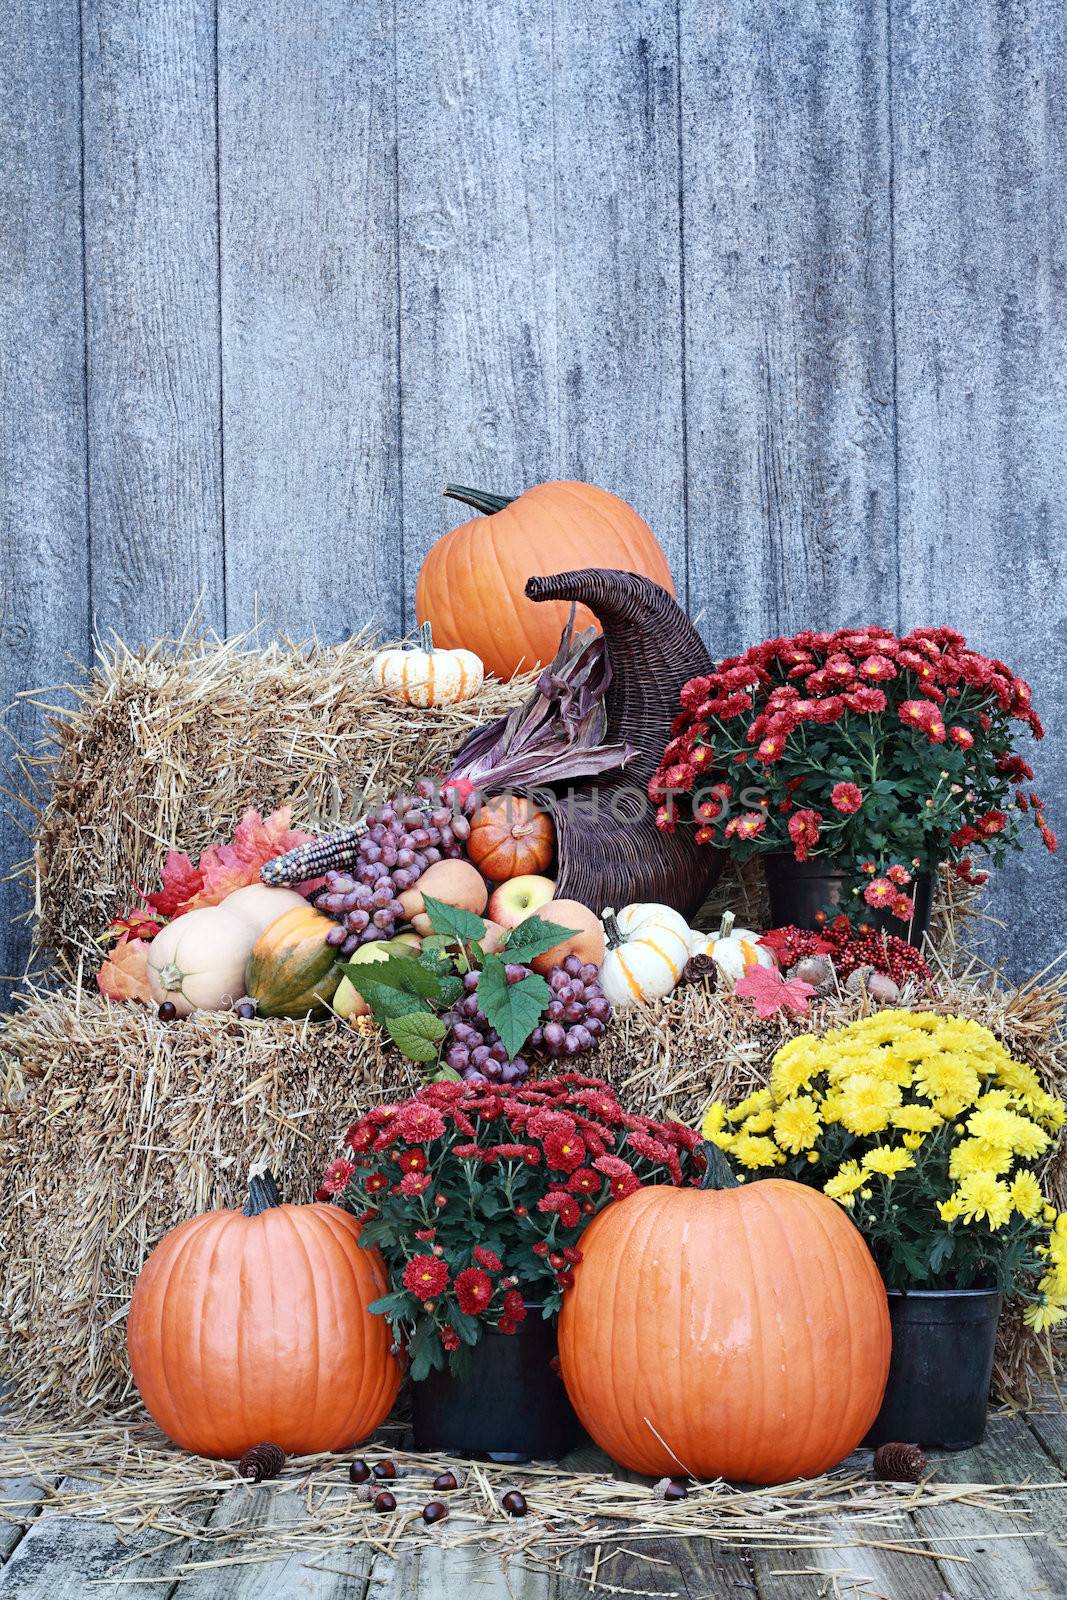 Cornucopia or Horn of Plenty spilling out fruits and vegetables with Pumpkins and Chrysanthemums on a bale of straw against a rustic background.